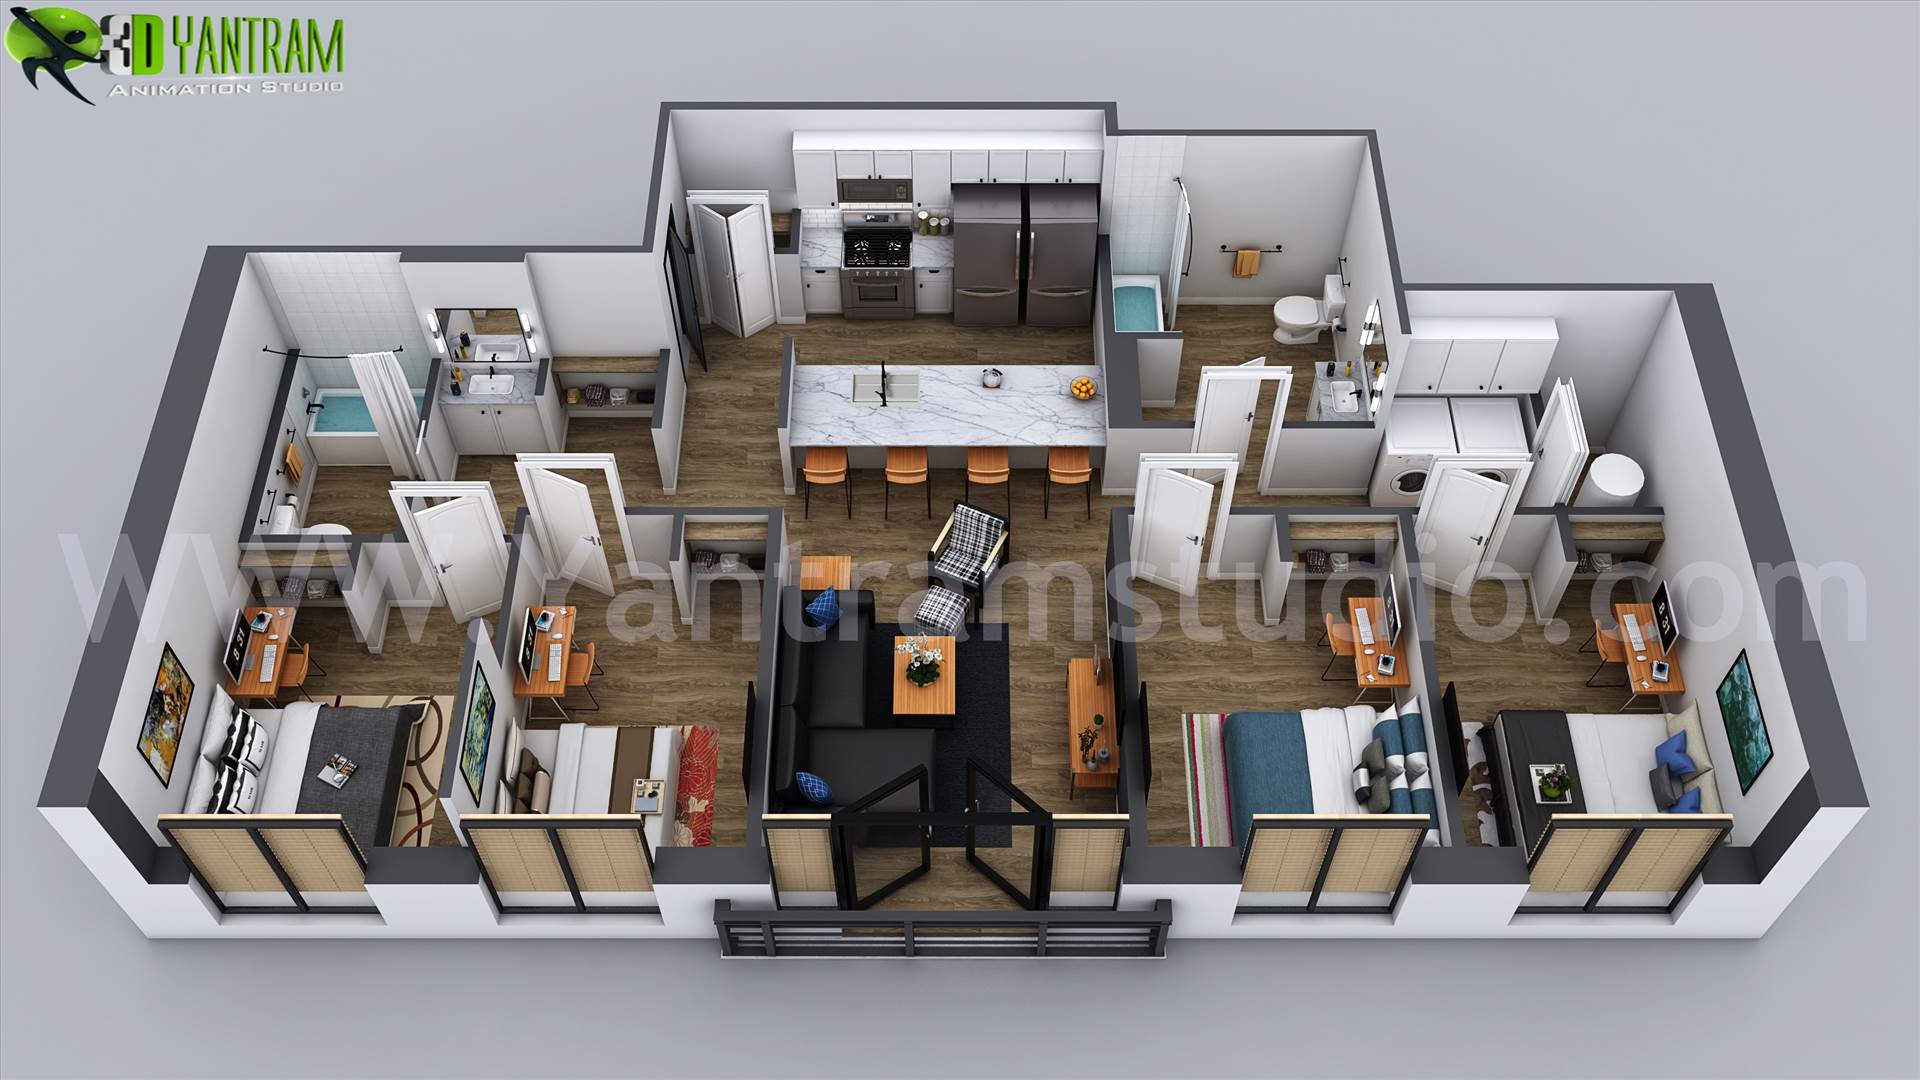 3D Home Floor Plan Designs By Yantram floor plan designer - Washington, USA - Floor plans are usually drawn to show exact property area and room types. some are come along with appliances and furniture for the better idea about placement and space utilization.
Read MOre -- https://goo.gl/6fYD3K

#Modern #3D #floorplan #design #i by Yantramarchitecturaldesignstudio